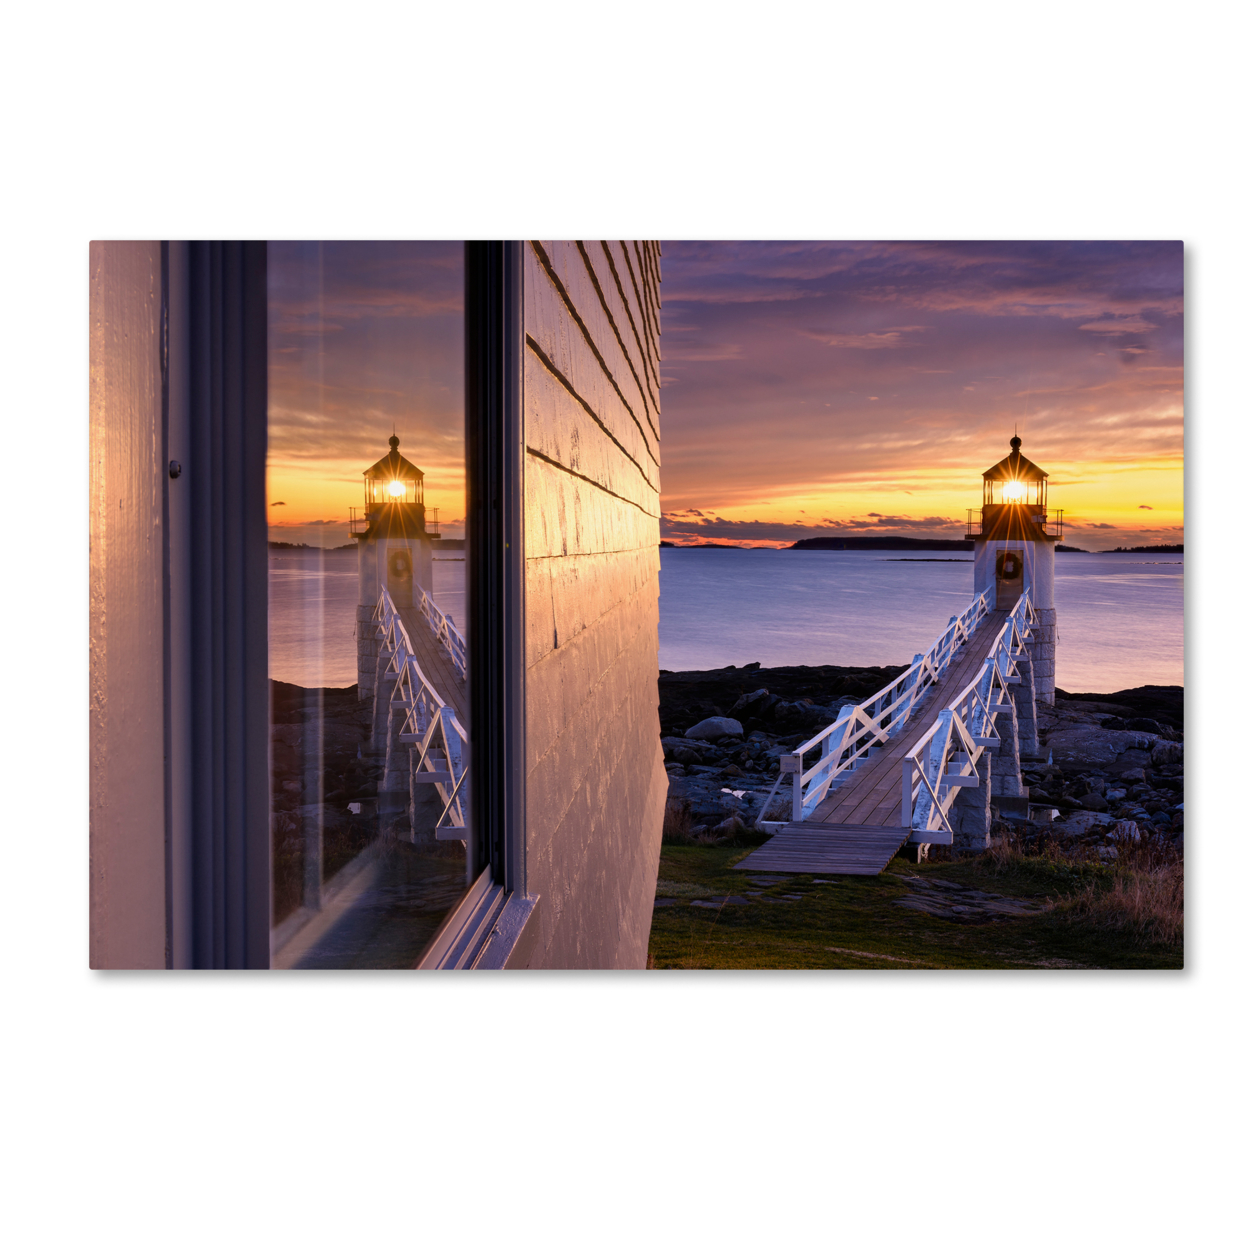 Michael Blanchette Photography 'Looking Glass' Canvas Art 16 X 24